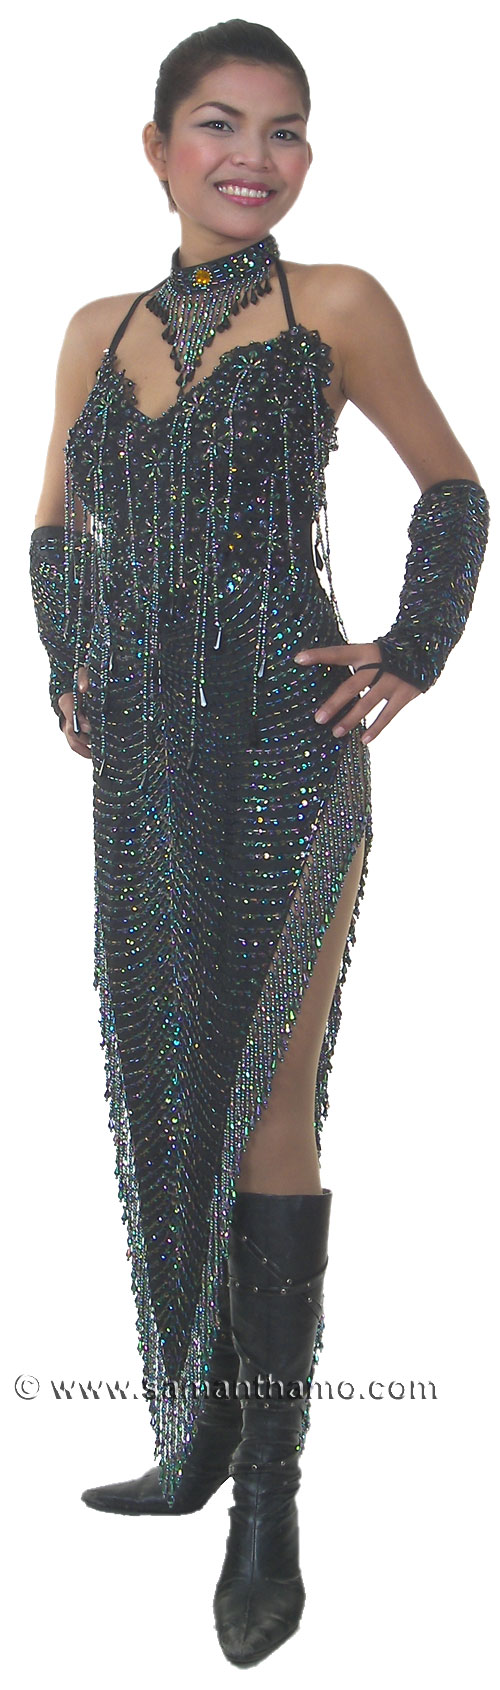 Sequin-Dresses/CT579-sparkling-sequin-dance-occasion-costume-gown.jpg